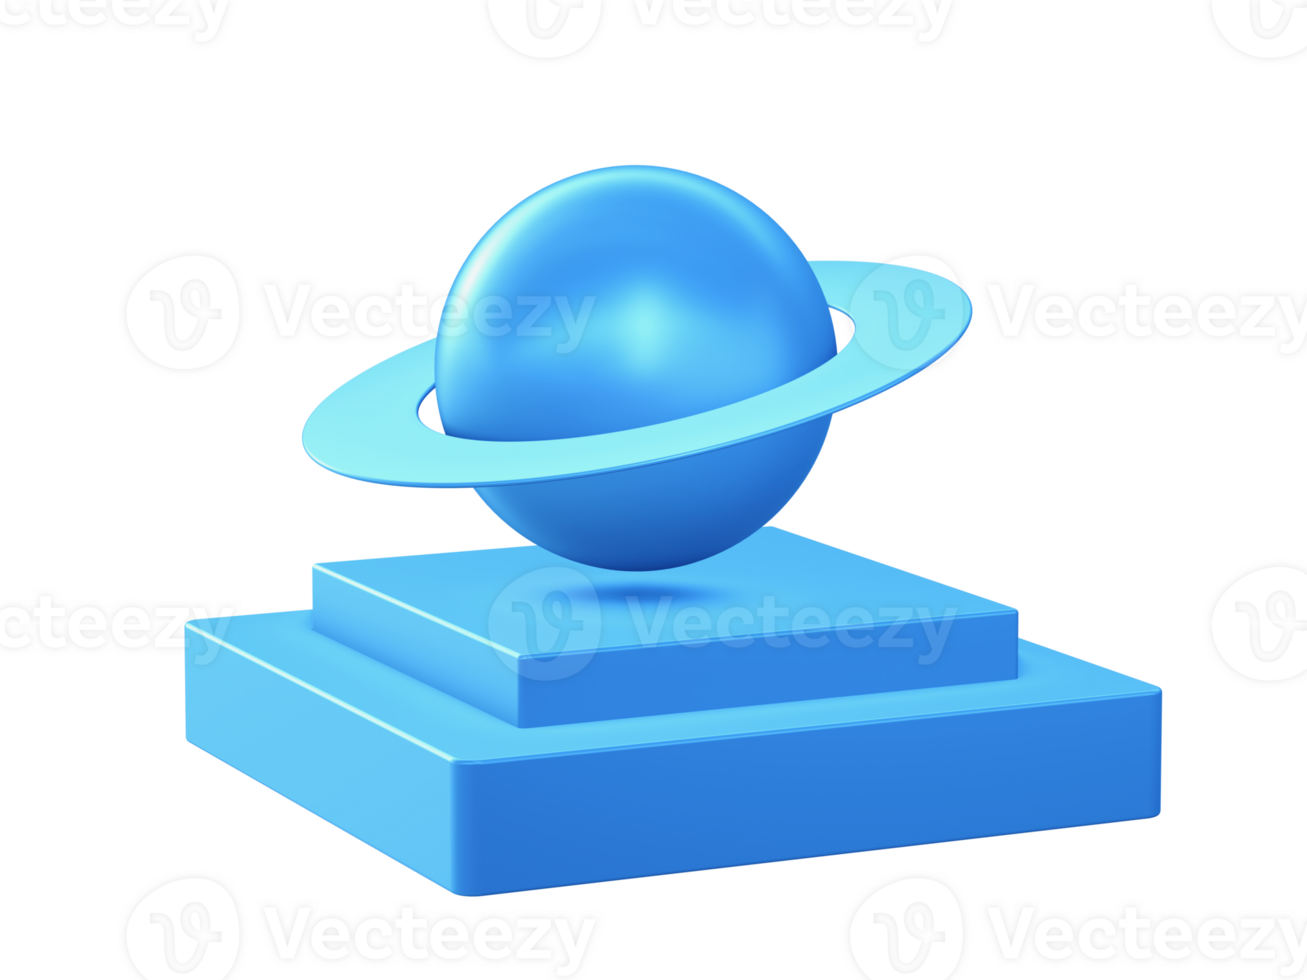 3d render of planet galaxy icon with square podium png